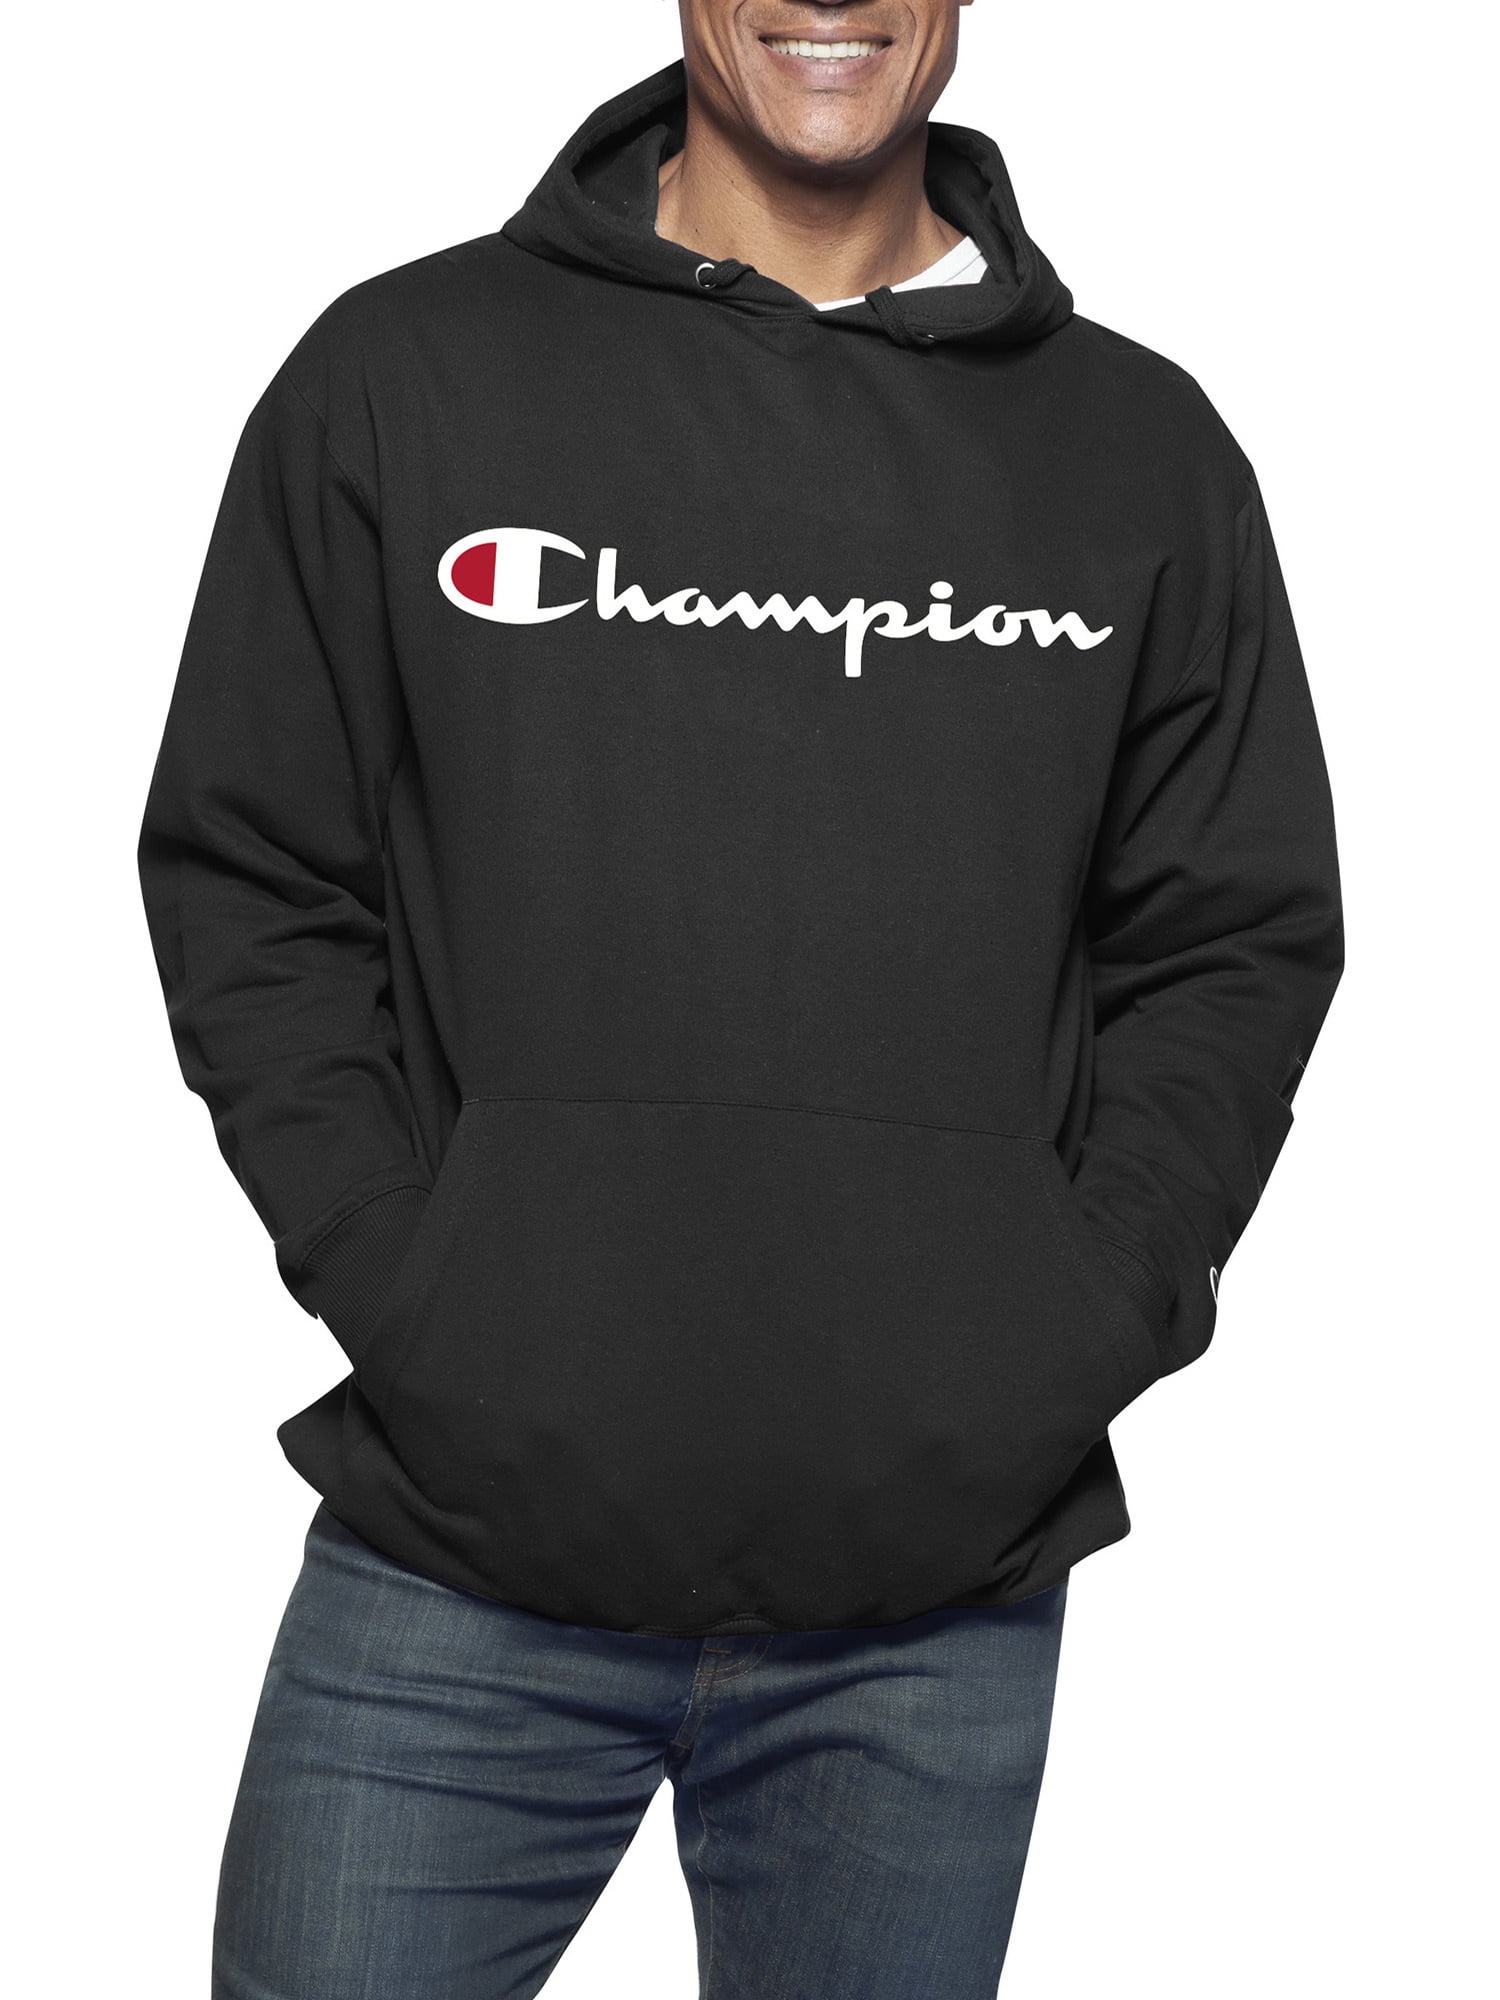 Champion Hoodie Jumper Navy Blue 5/6 Size Youth Large